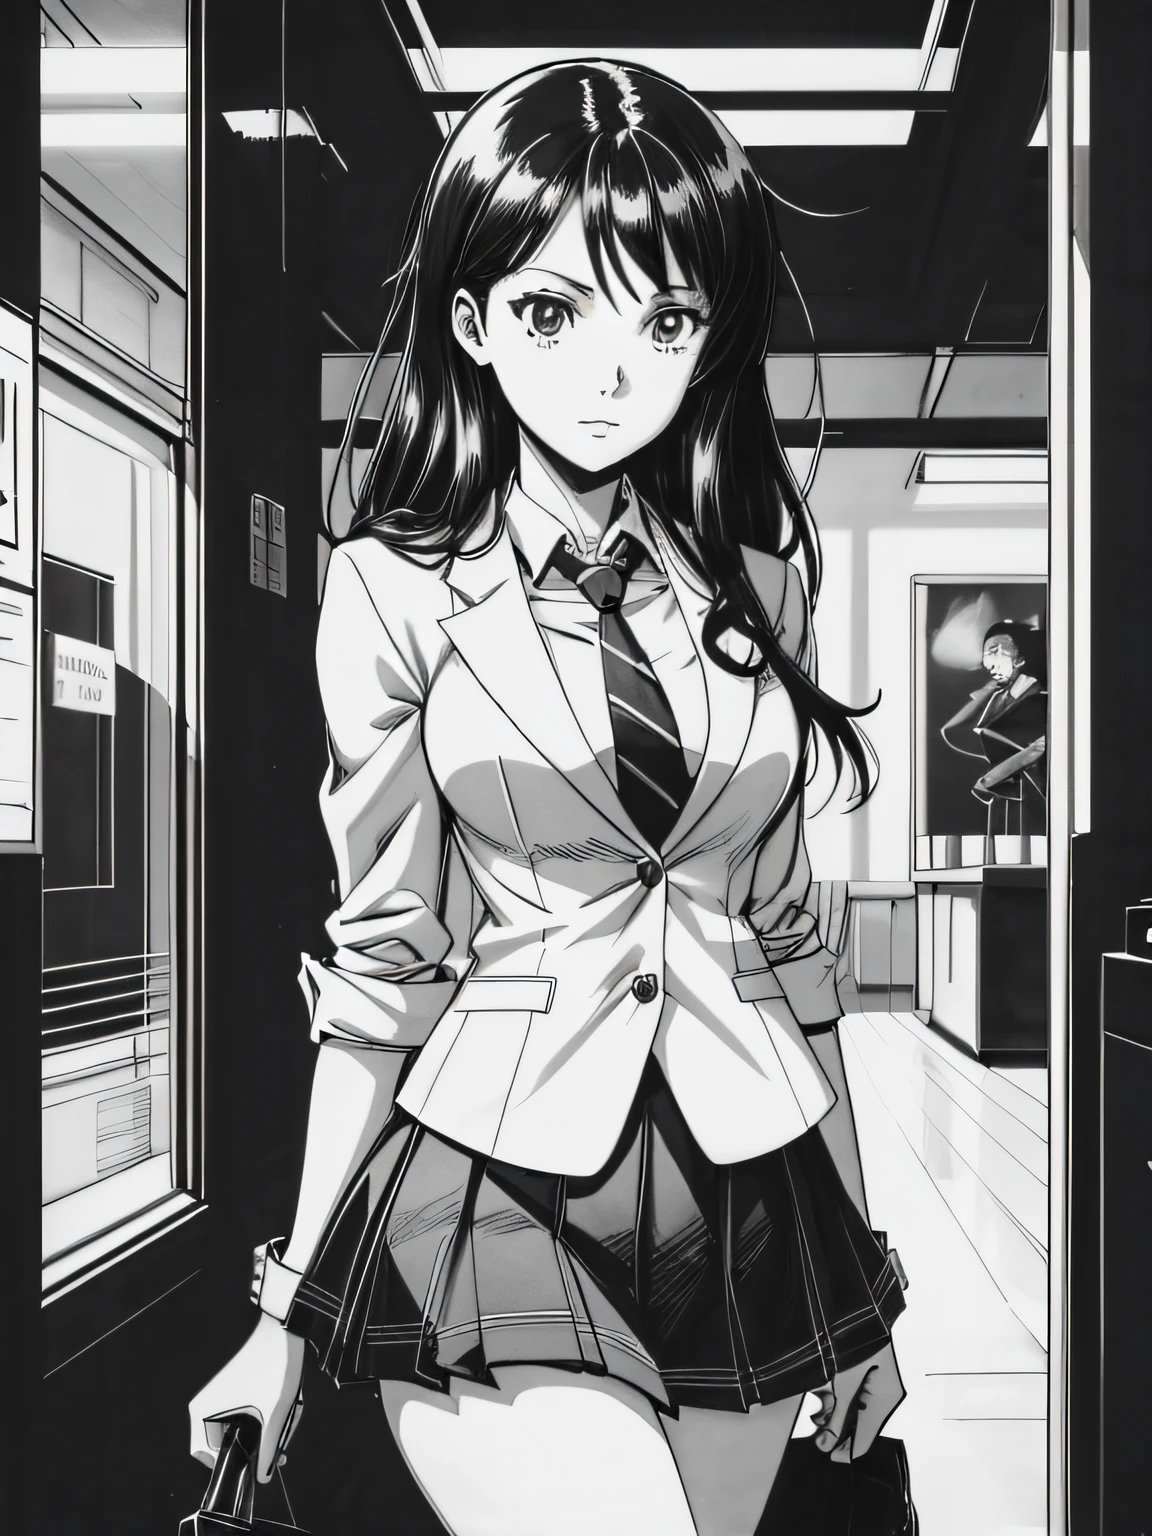 of the highest quality, Best Quality,超A high resolution, hight resolution, (masutepiece), (Comic noir style illustration), (linear art_Anime),(black-and-white:1.0),(monotone_highcontrast),hi-school girl,high-school uniform、neck tie、blazers、skirt by the,Inside the school_the complex background,,(lora Add More Detail:1.2)